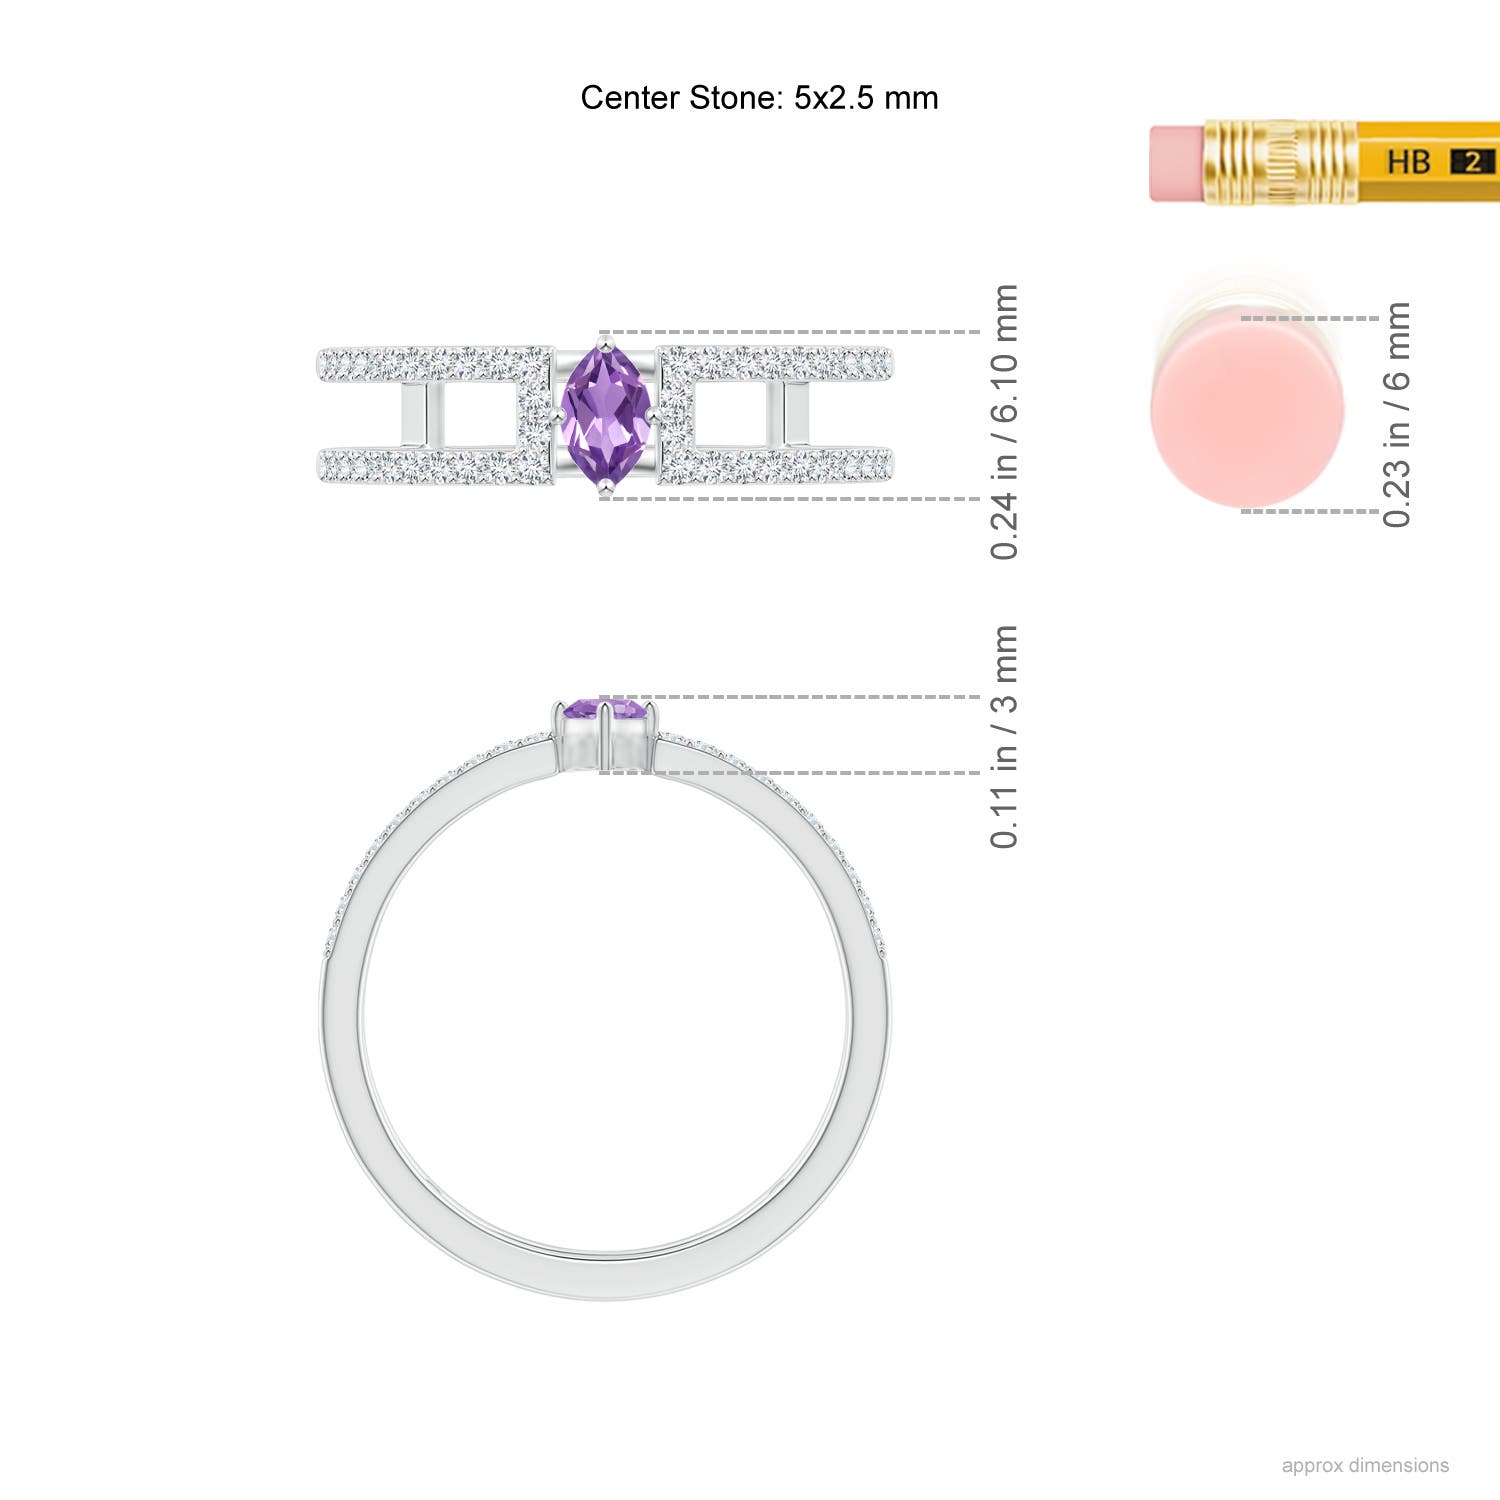 A - Amethyst / 0.44 CT / 14 KT White Gold